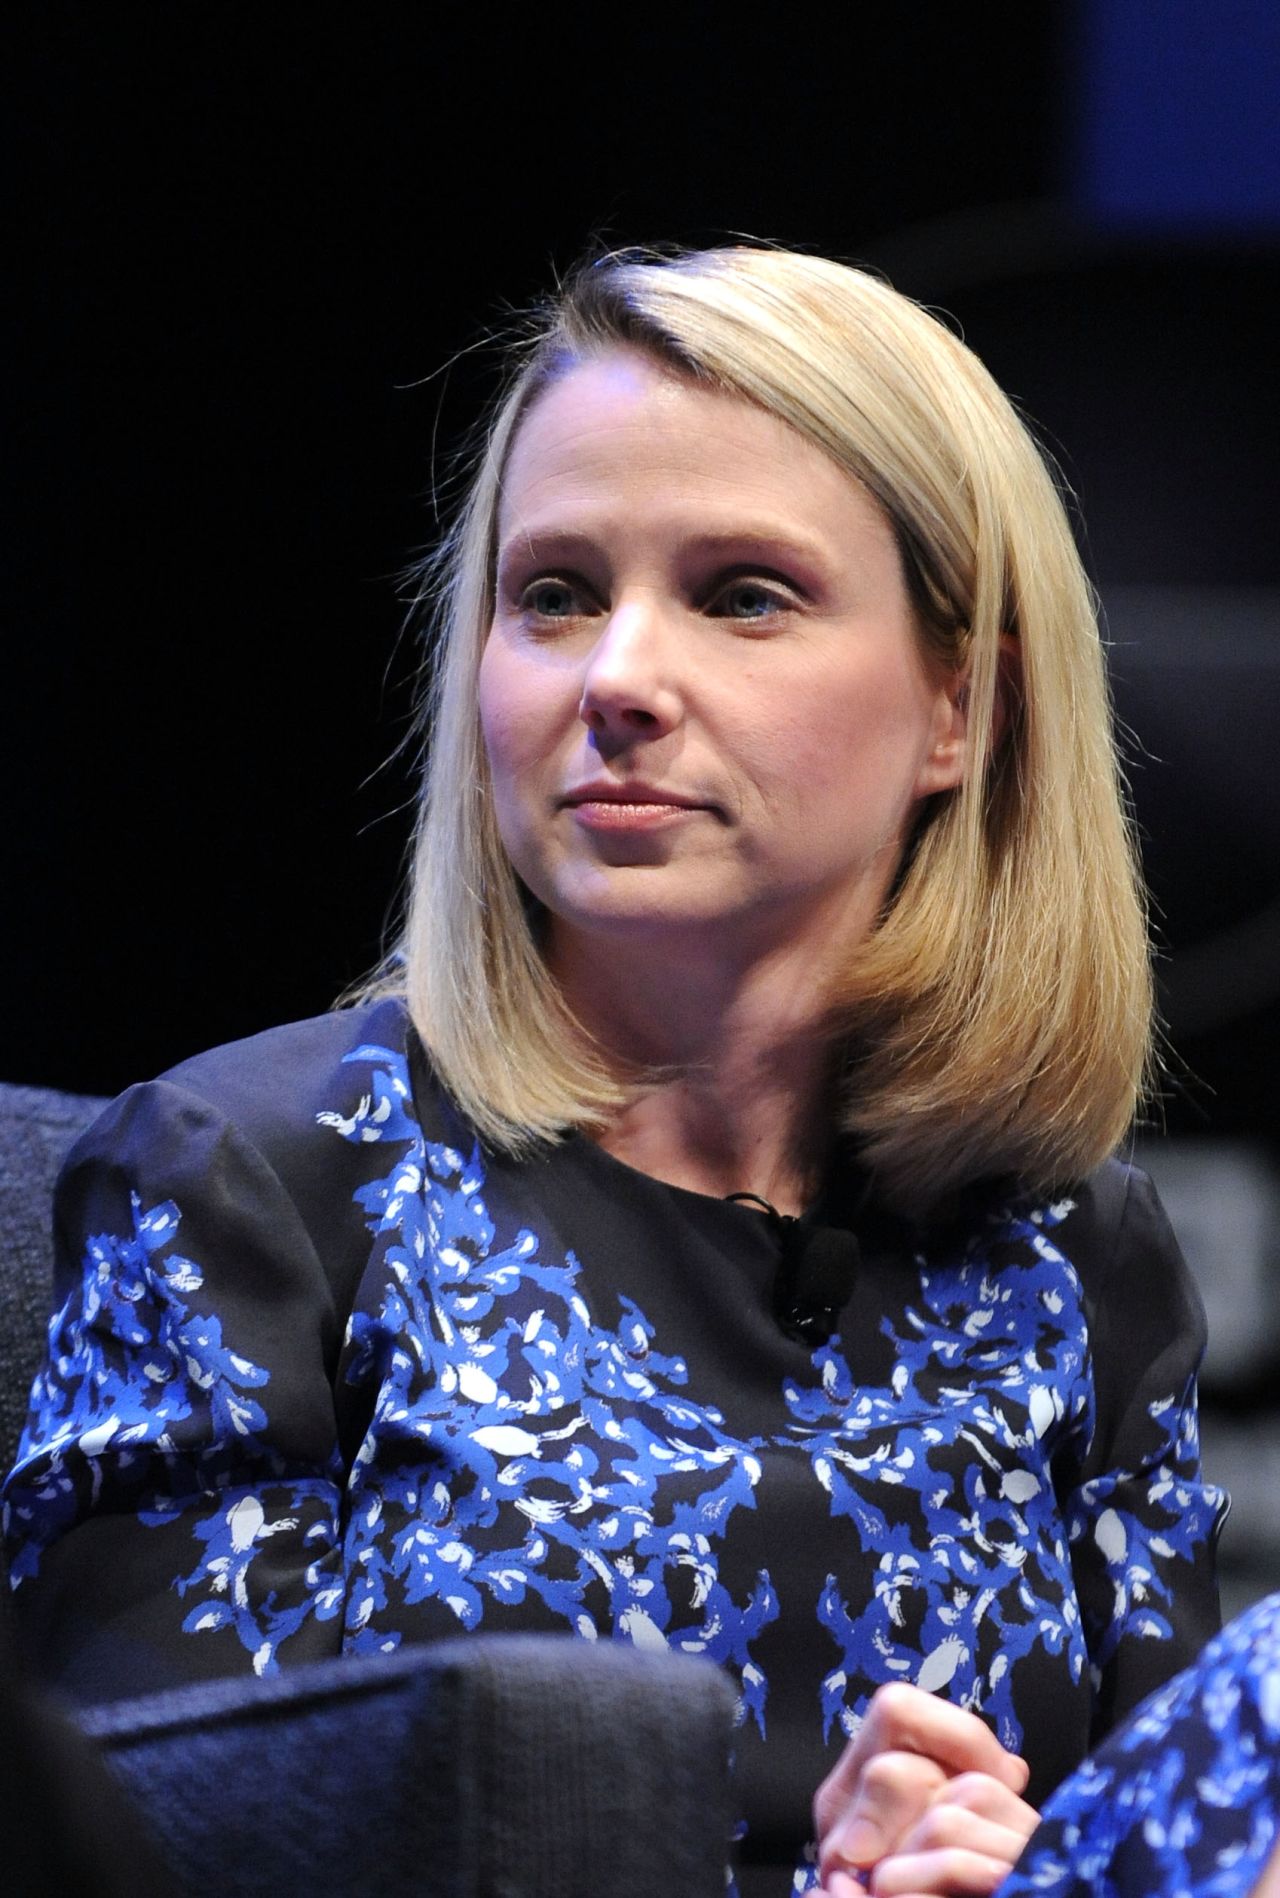 Pictured in 2013, Mayer has often been named one of the most powerful women in business. "I didn't set out to be at the top of technology companies," <a href="http://www.vogue.com/magazine/article/hail-to-the-chief-yahoos-marissa-mayer/#1" target="_blank" target="_blank">she told Vogue magazine</a>. "I'm just geeky and shy and I like to code. ... It's not like I had a grand plan where I weighed all the pros and cons of what I wanted to do—it just sort of happened."